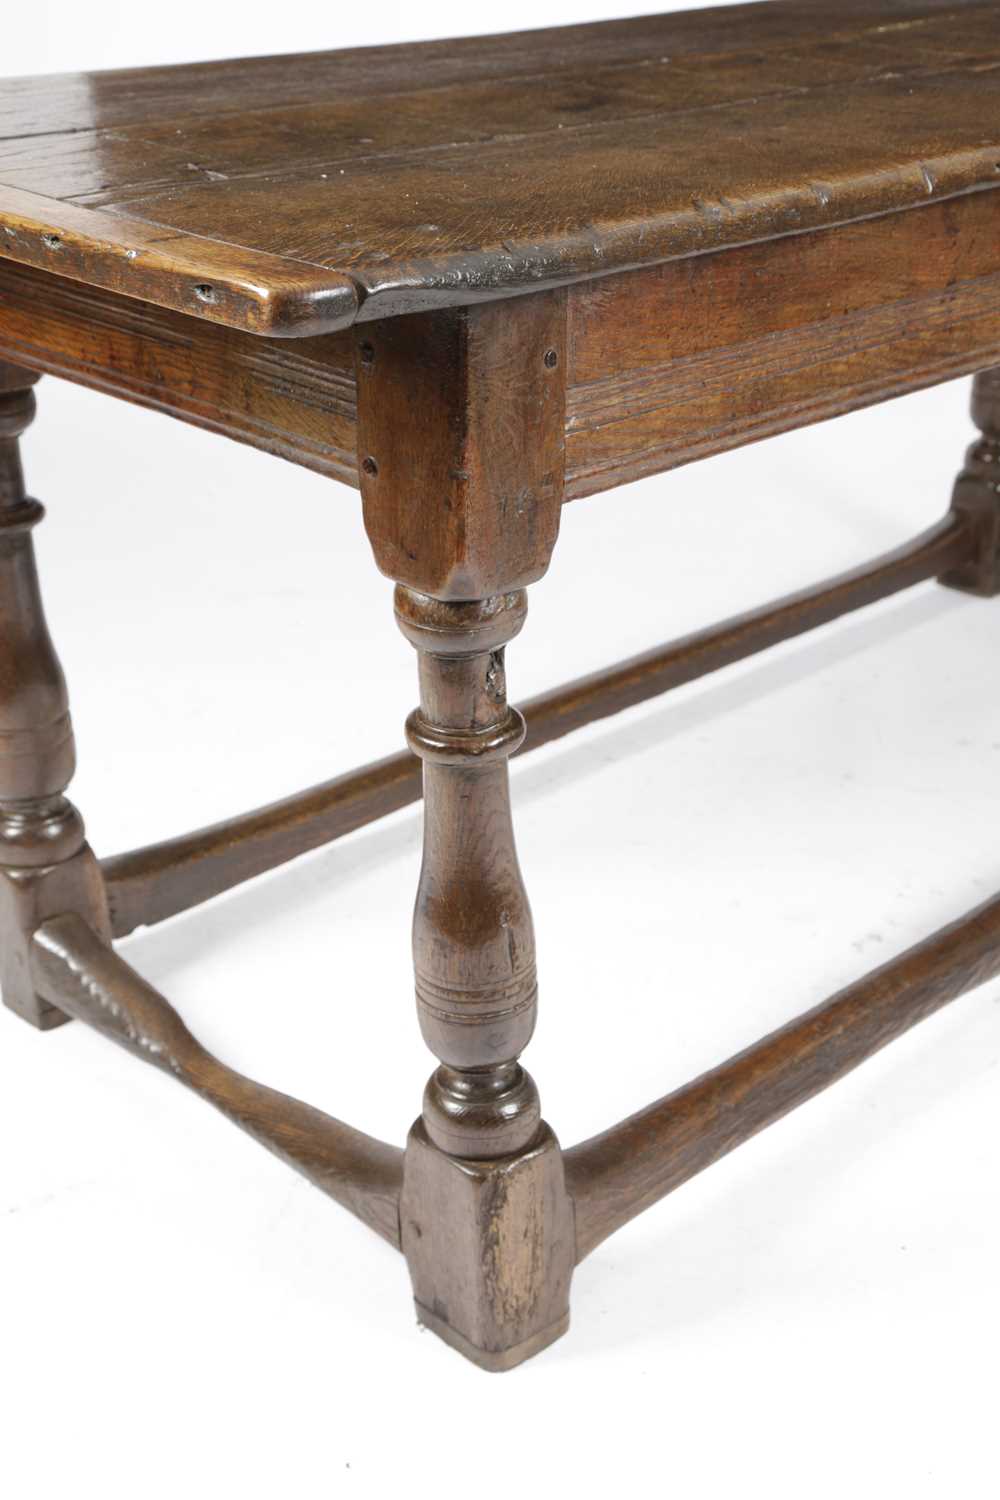 AN OAK REFECTORY TABLE LATE 17TH CENTURY AND LATER the boarded top with cleated ends, above a - Image 2 of 4